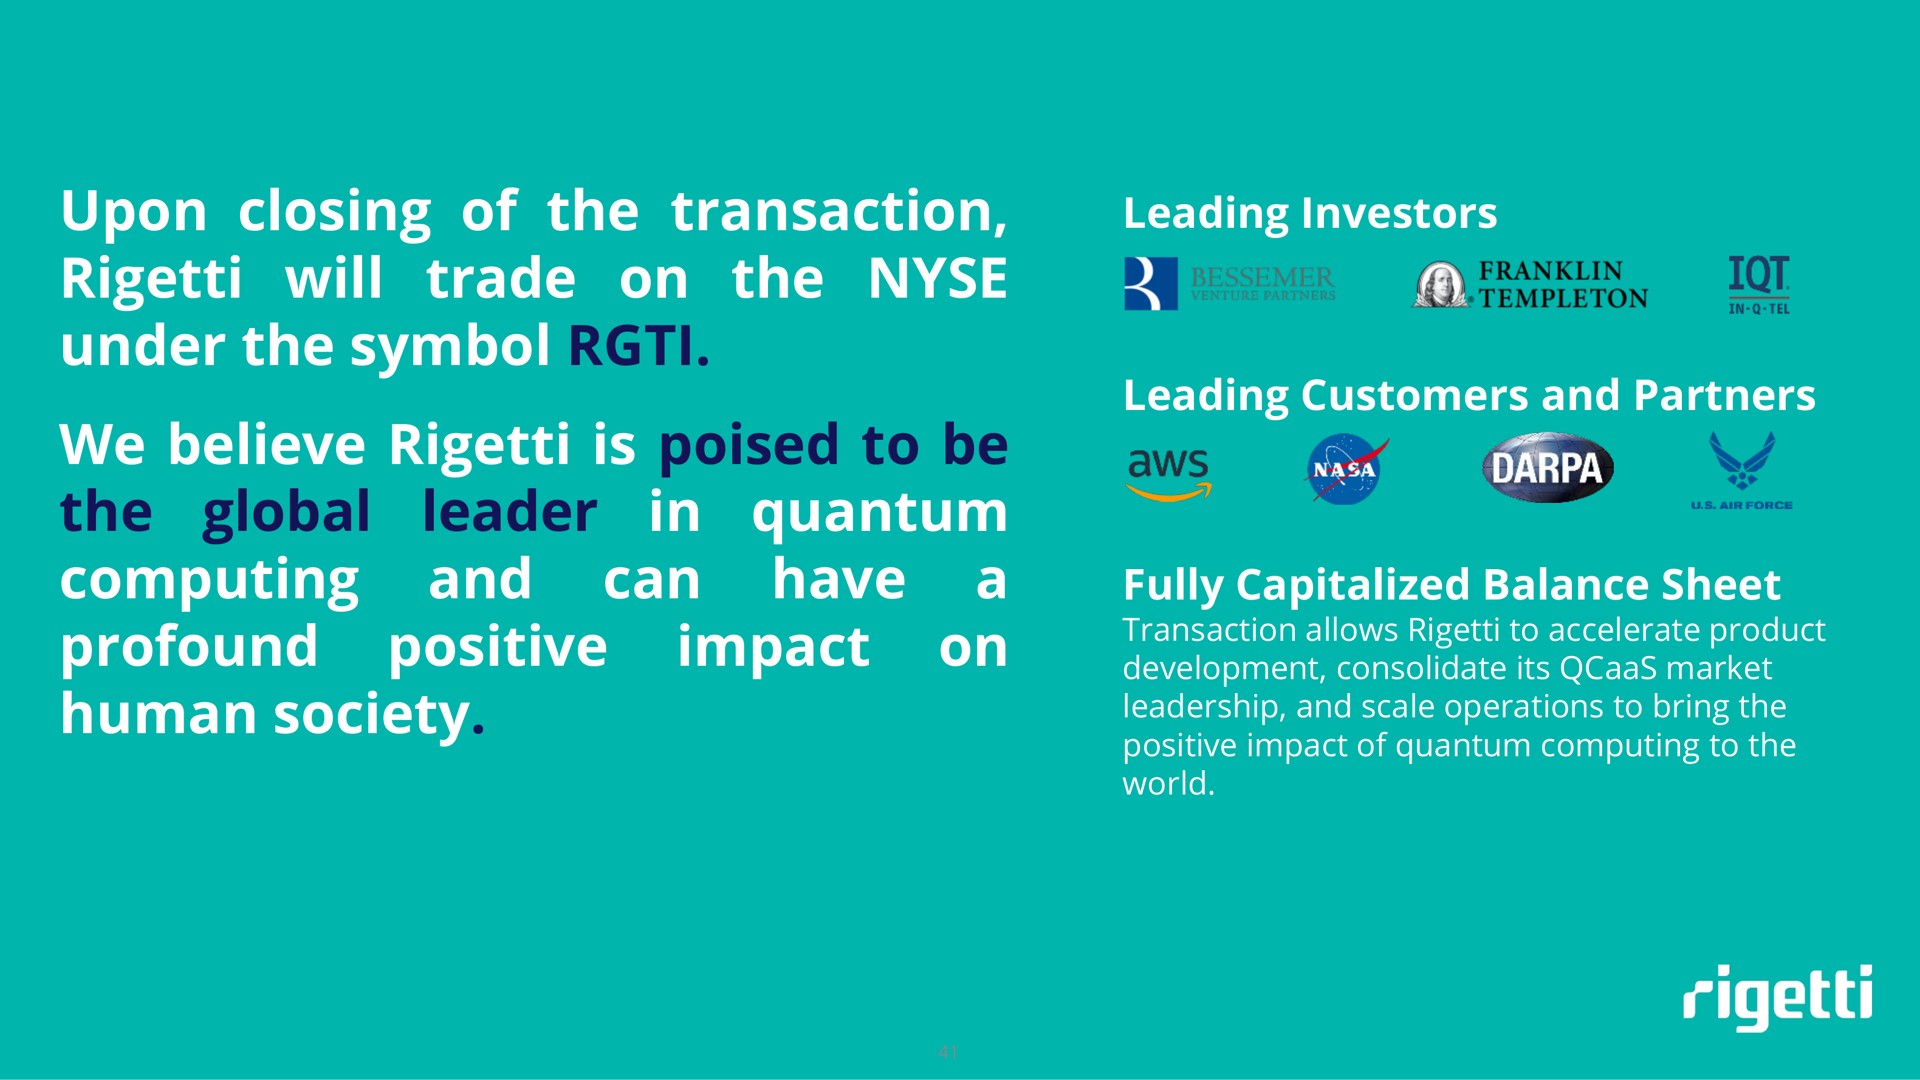 upon closing of the transaction will trade on the under the symbol we believe is poised to be leader in quantum the global computing a and can have impact on profound positive human society | Rigetti